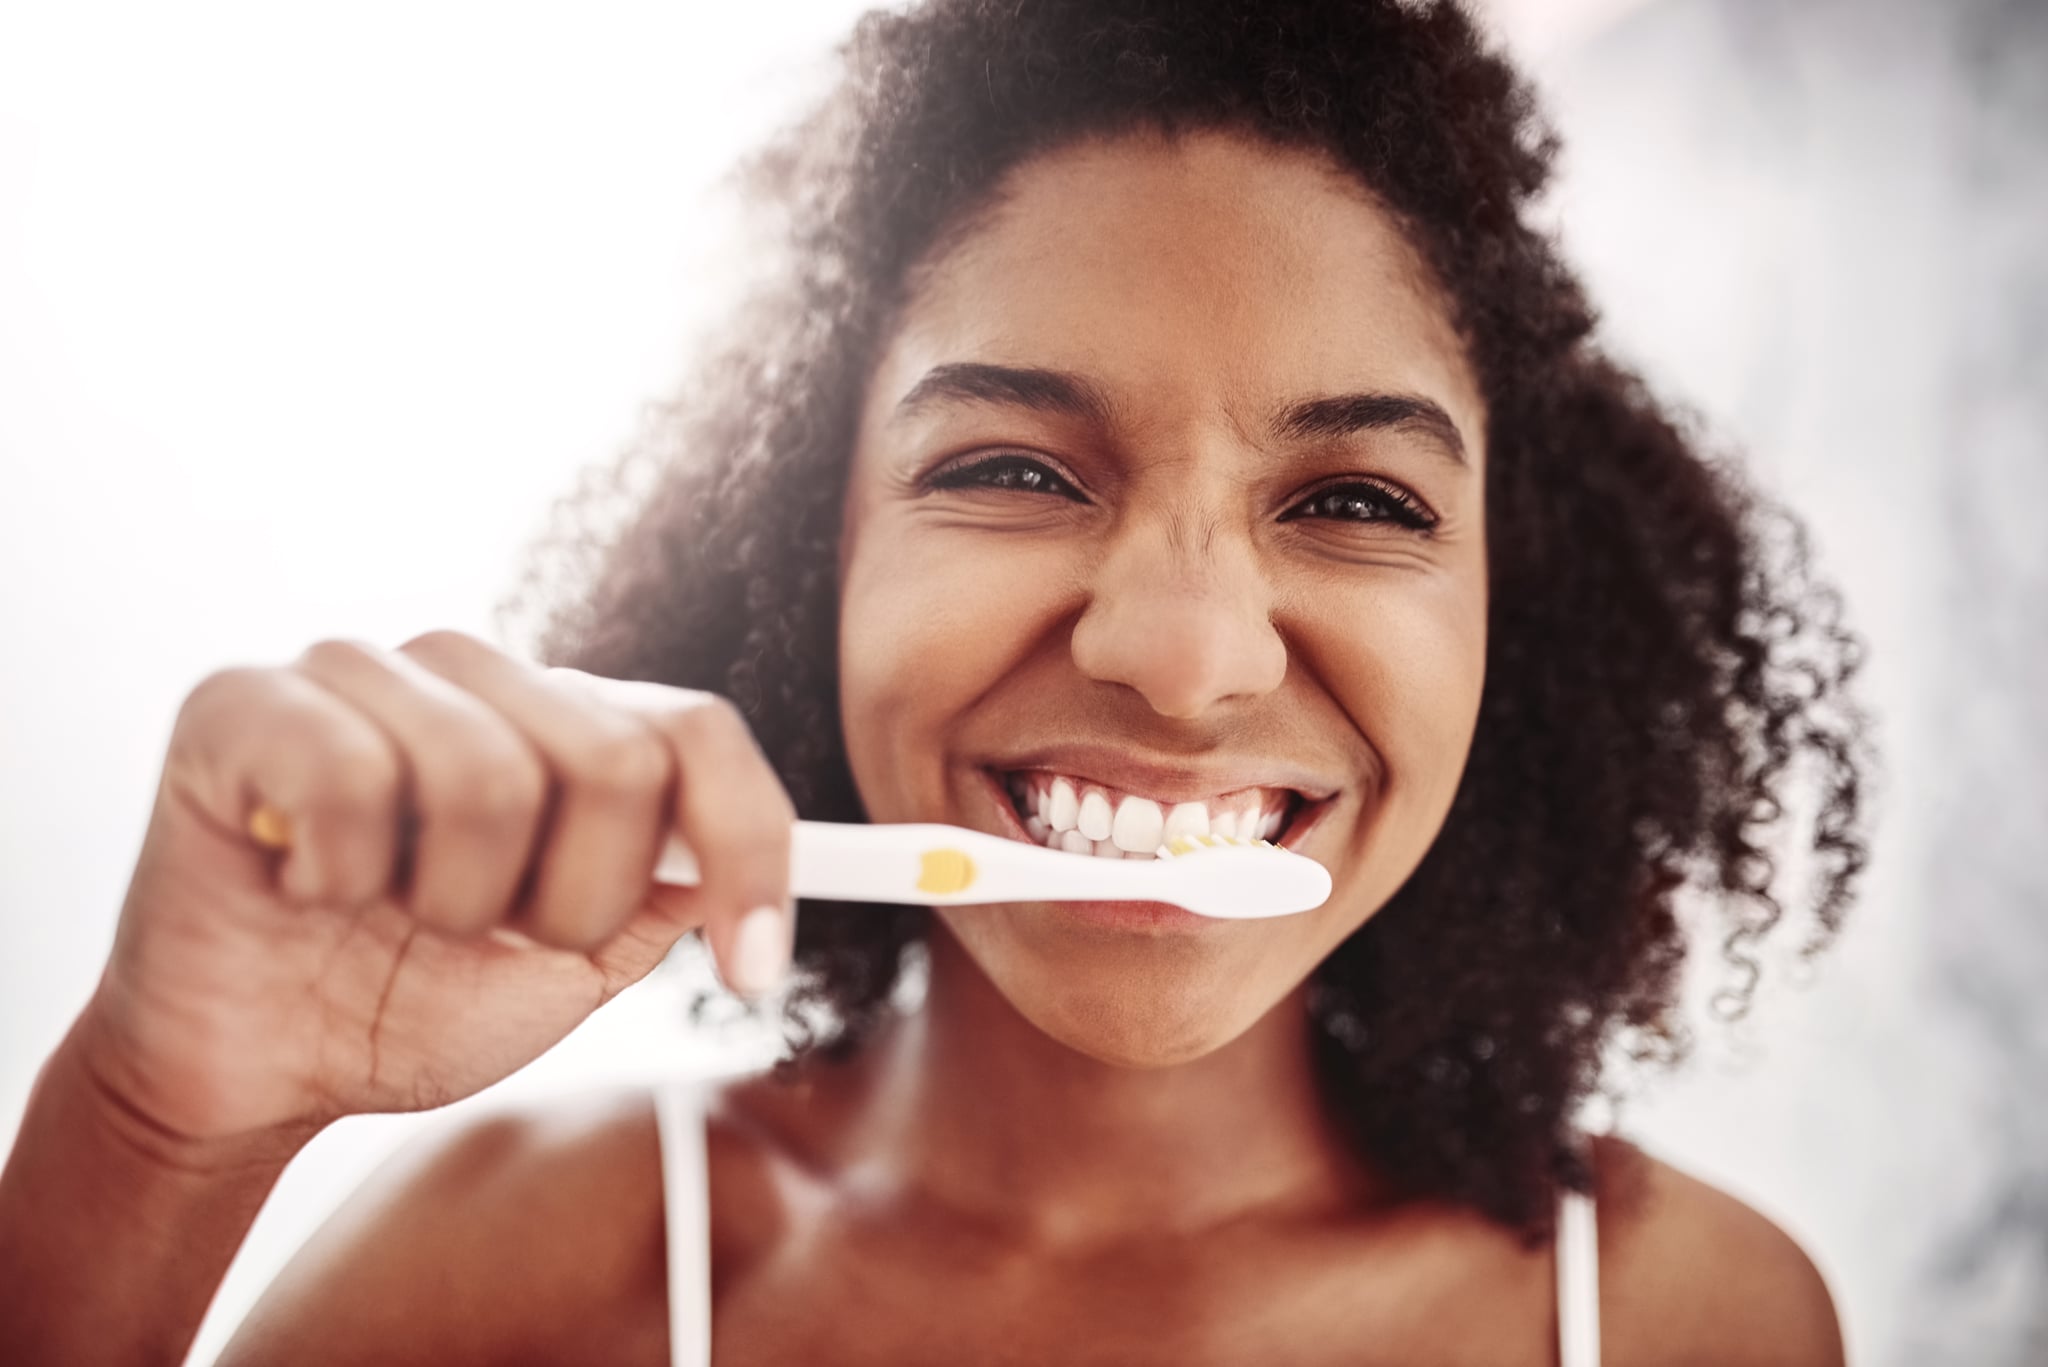 How to Prevent Cavities If You Delayed a Teeth Cleaning | POPSUGAR Fitness